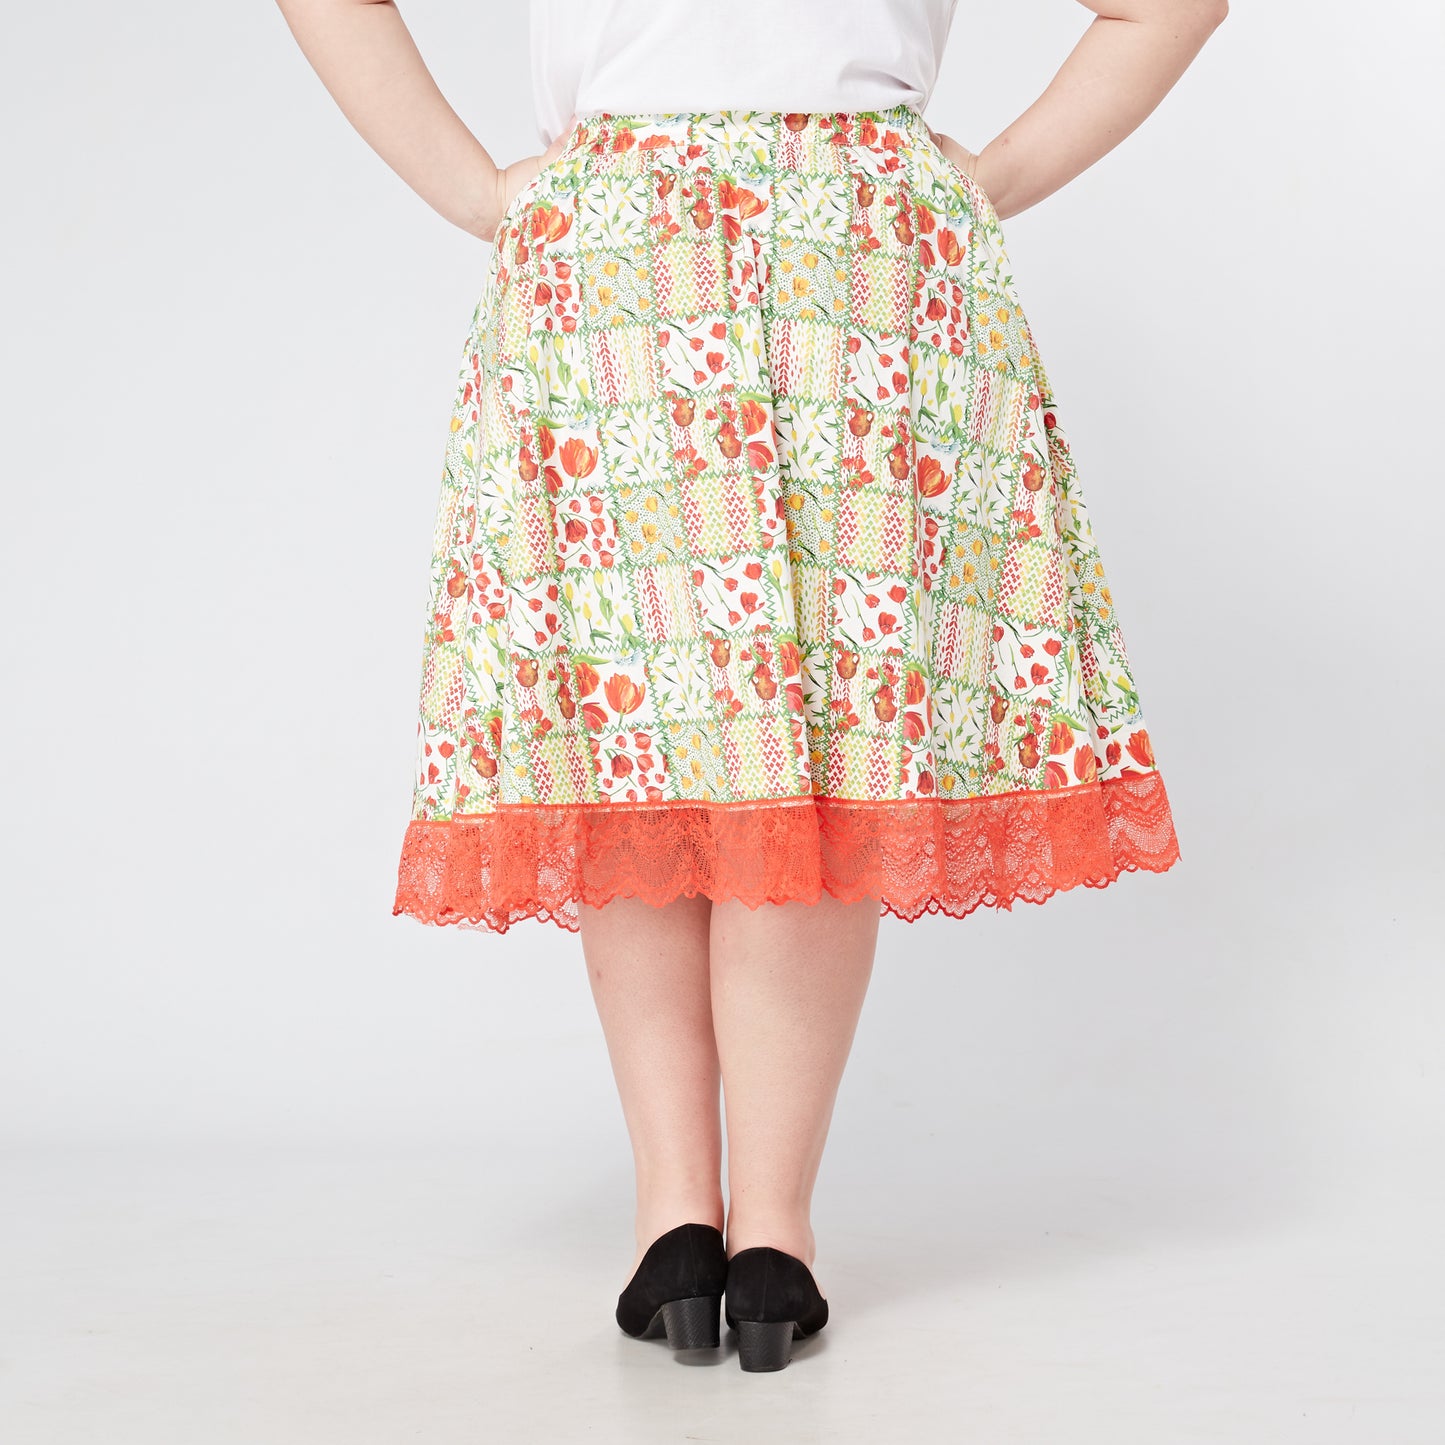 'Clover' Button Through Swing Skirt in Patchwork Floral